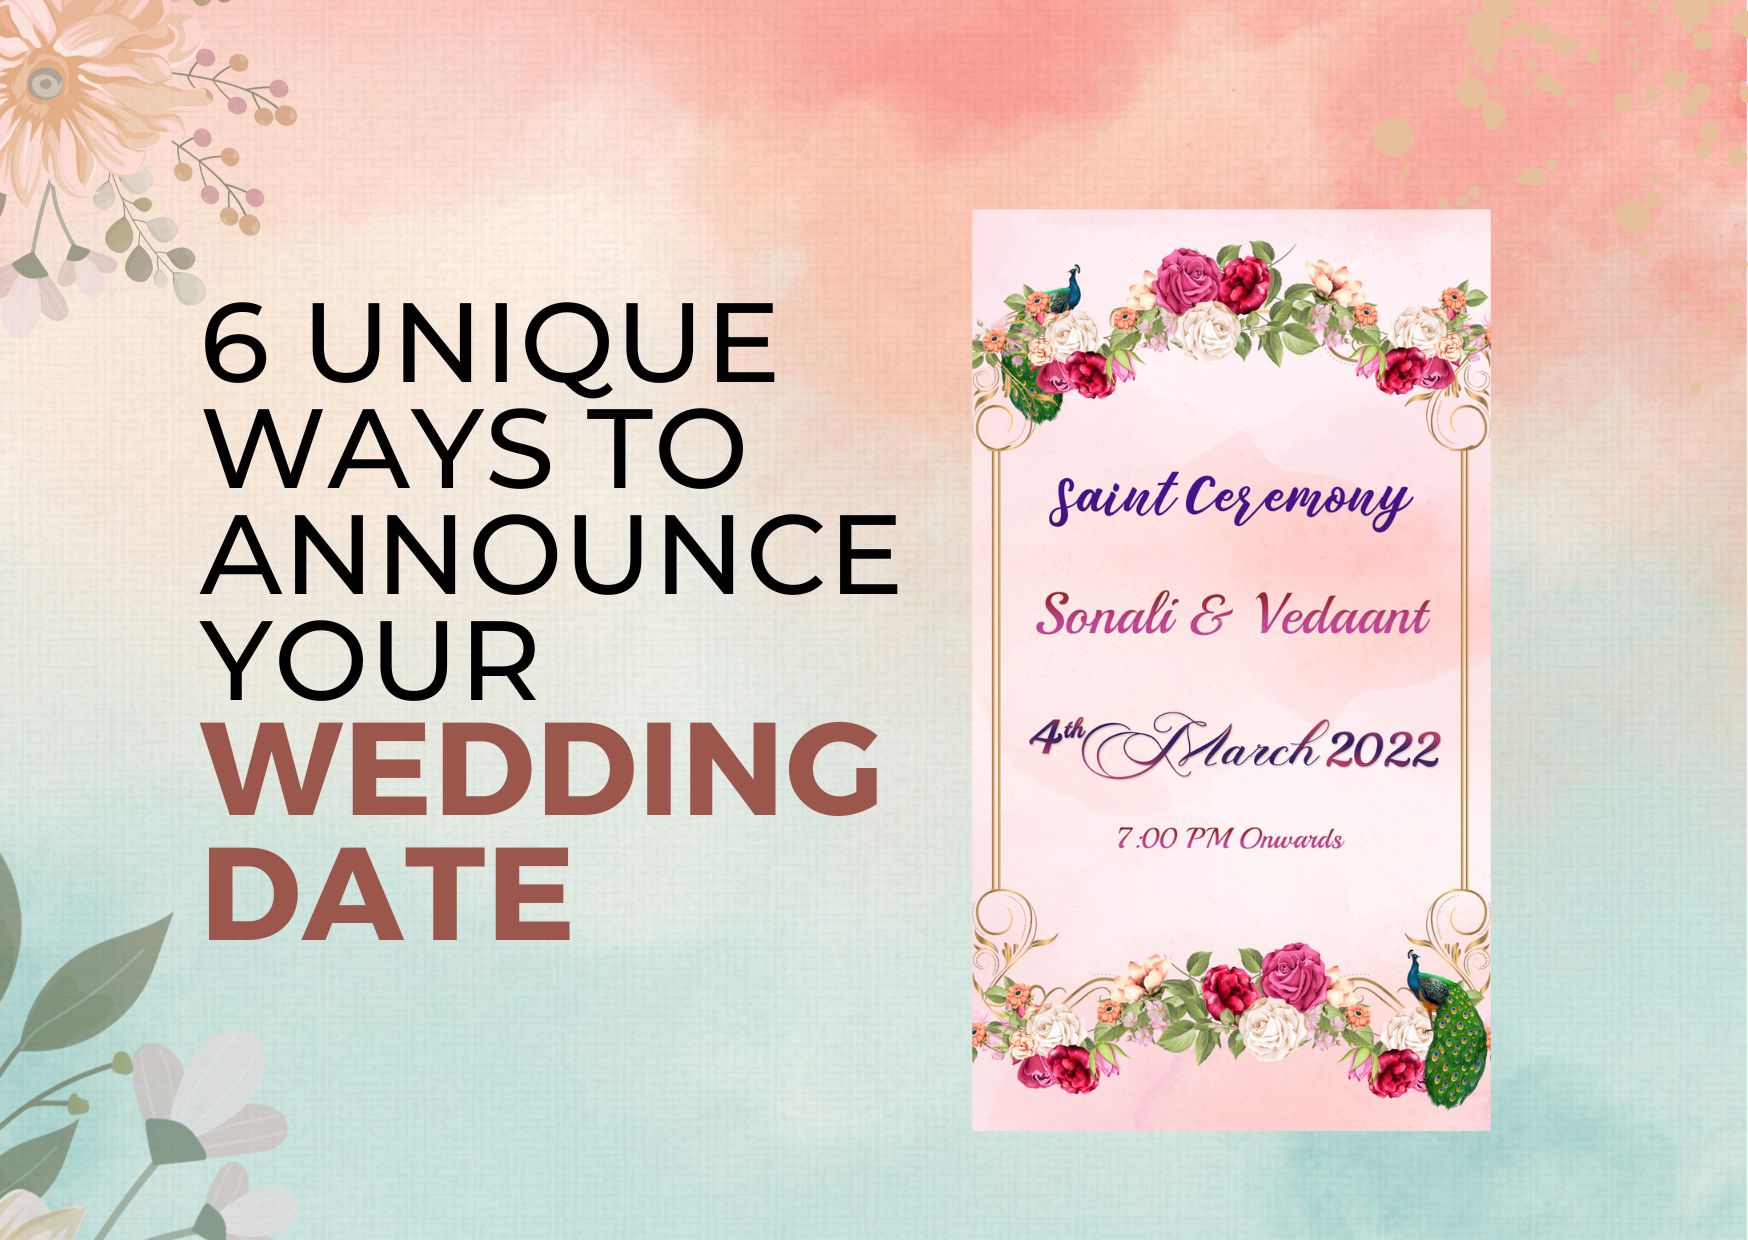 6 Unique Ways to Announce Your Wedding Date